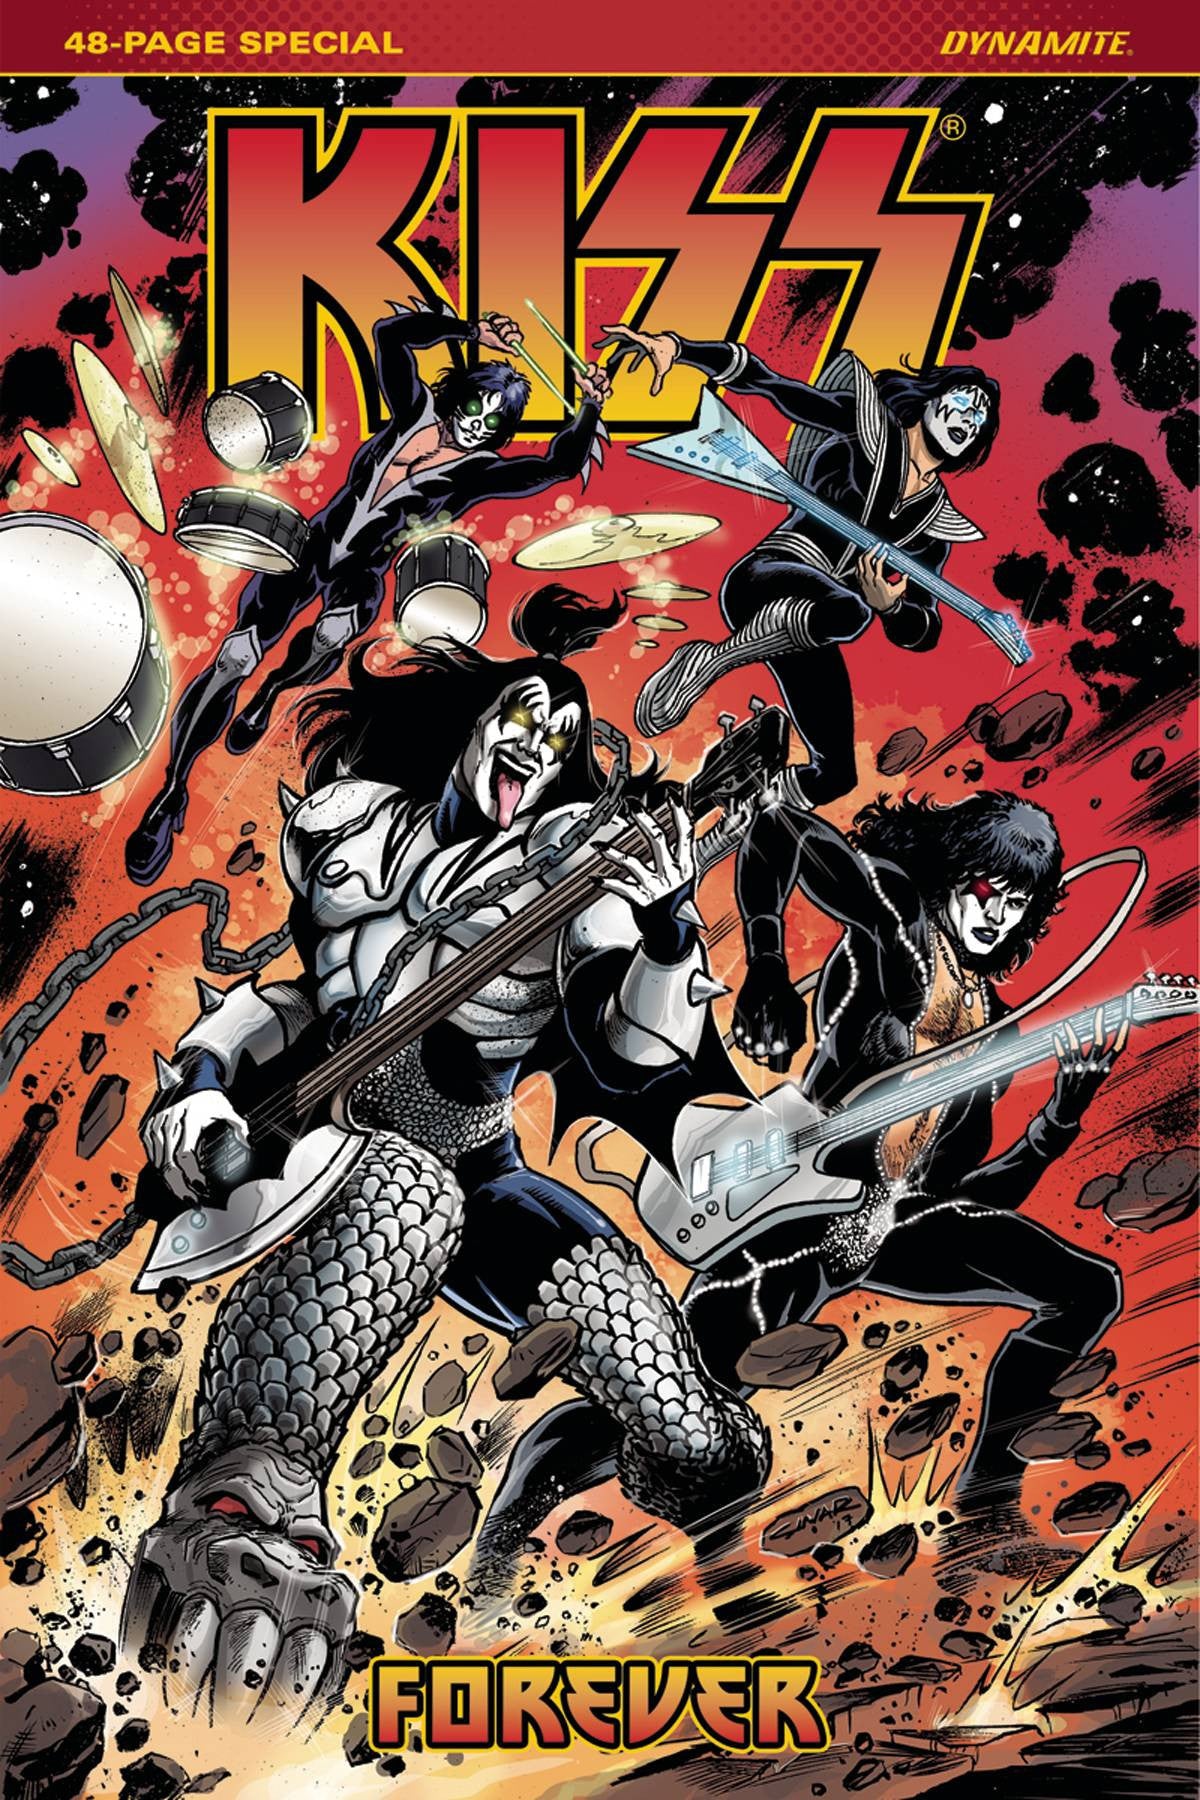 KISS FOREVER SPECIAL COVER